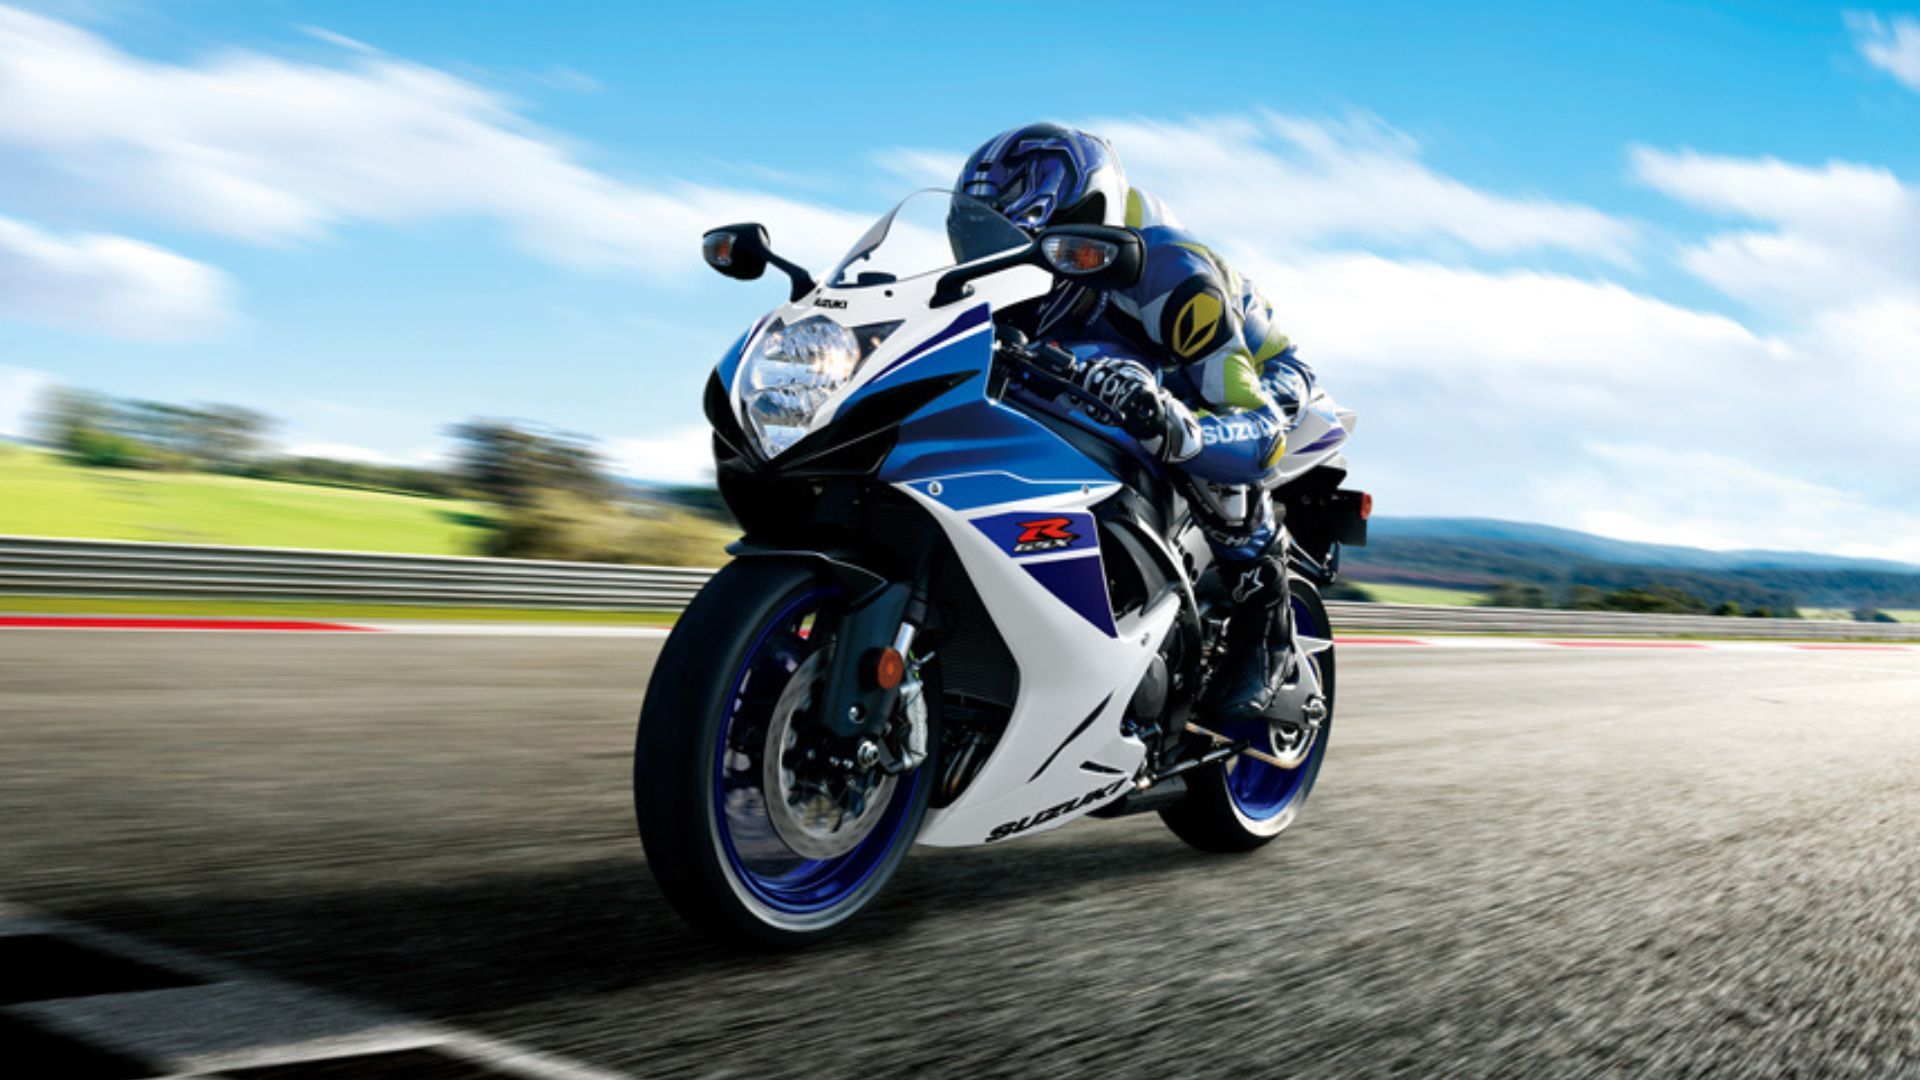 10 fastest motorcycles under $15,000